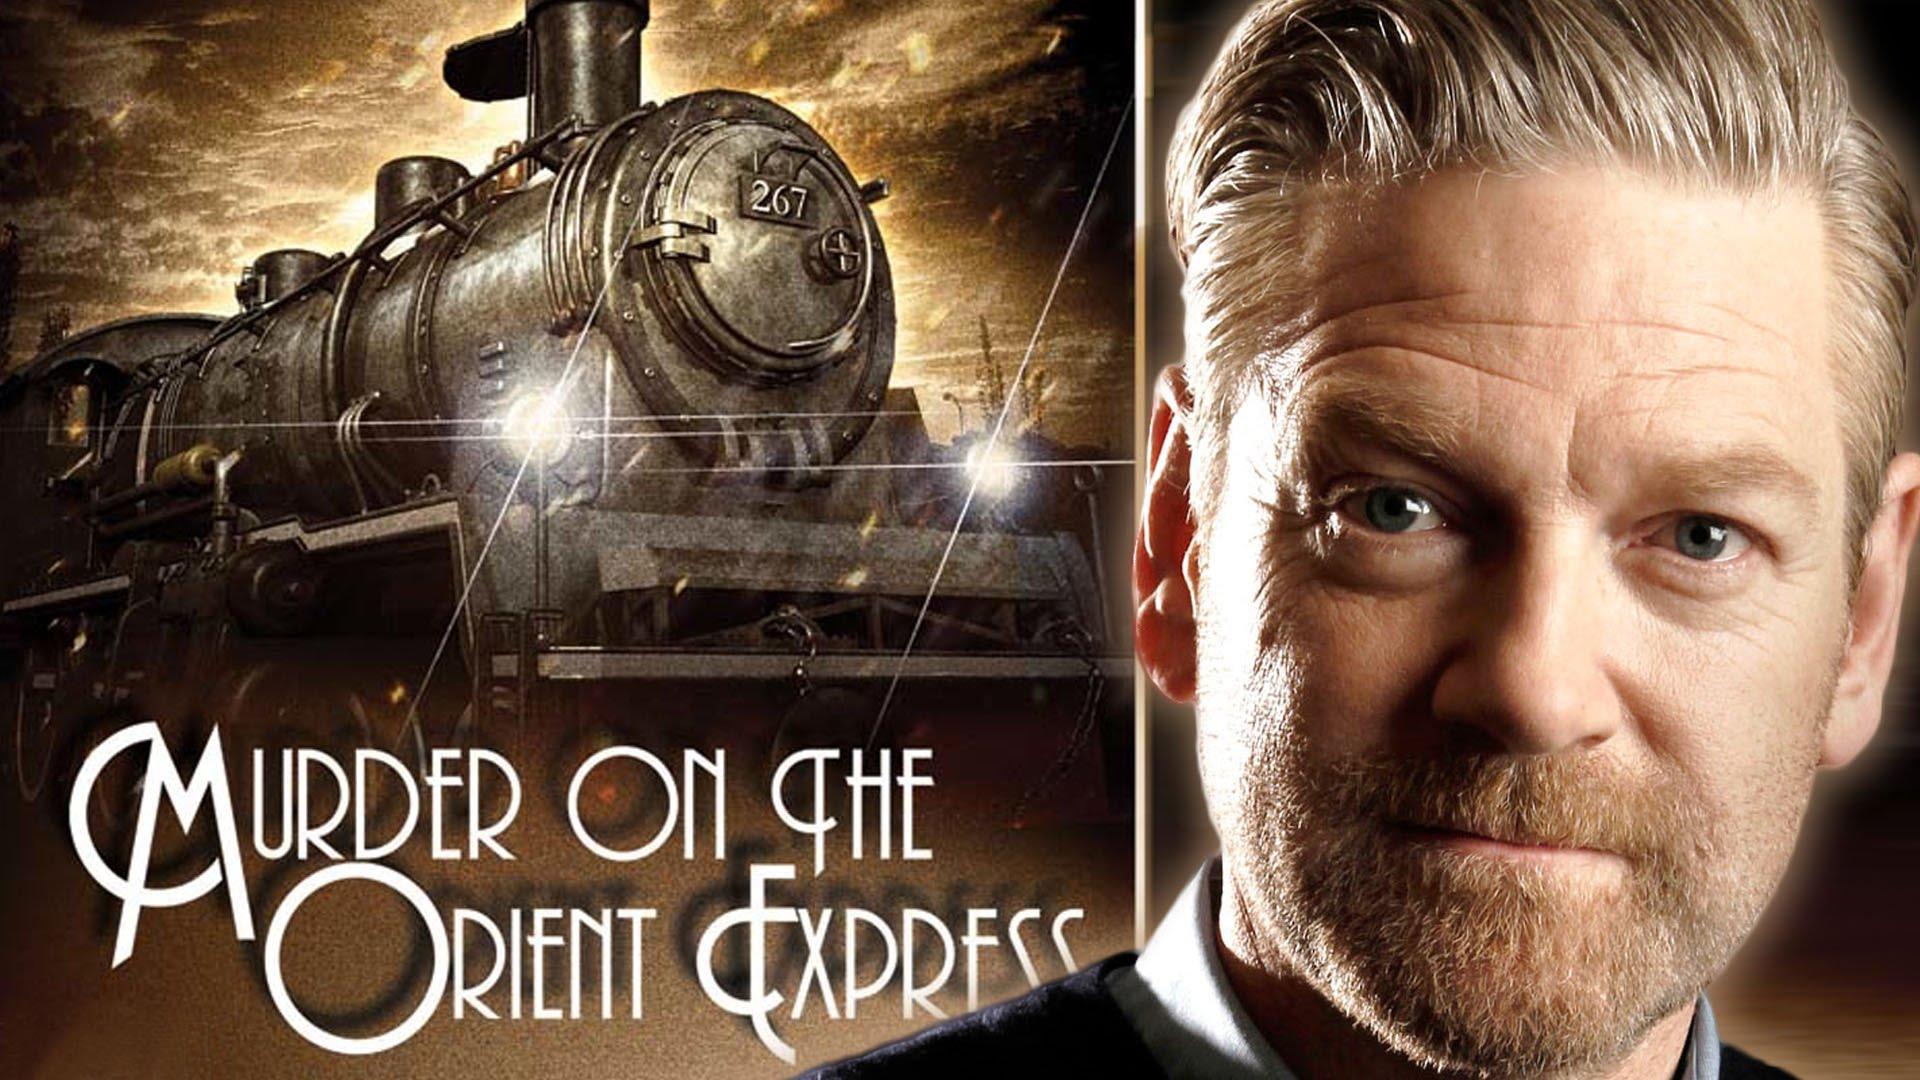 Kenneth Branagh to direct and star in Murder on the Orient Express